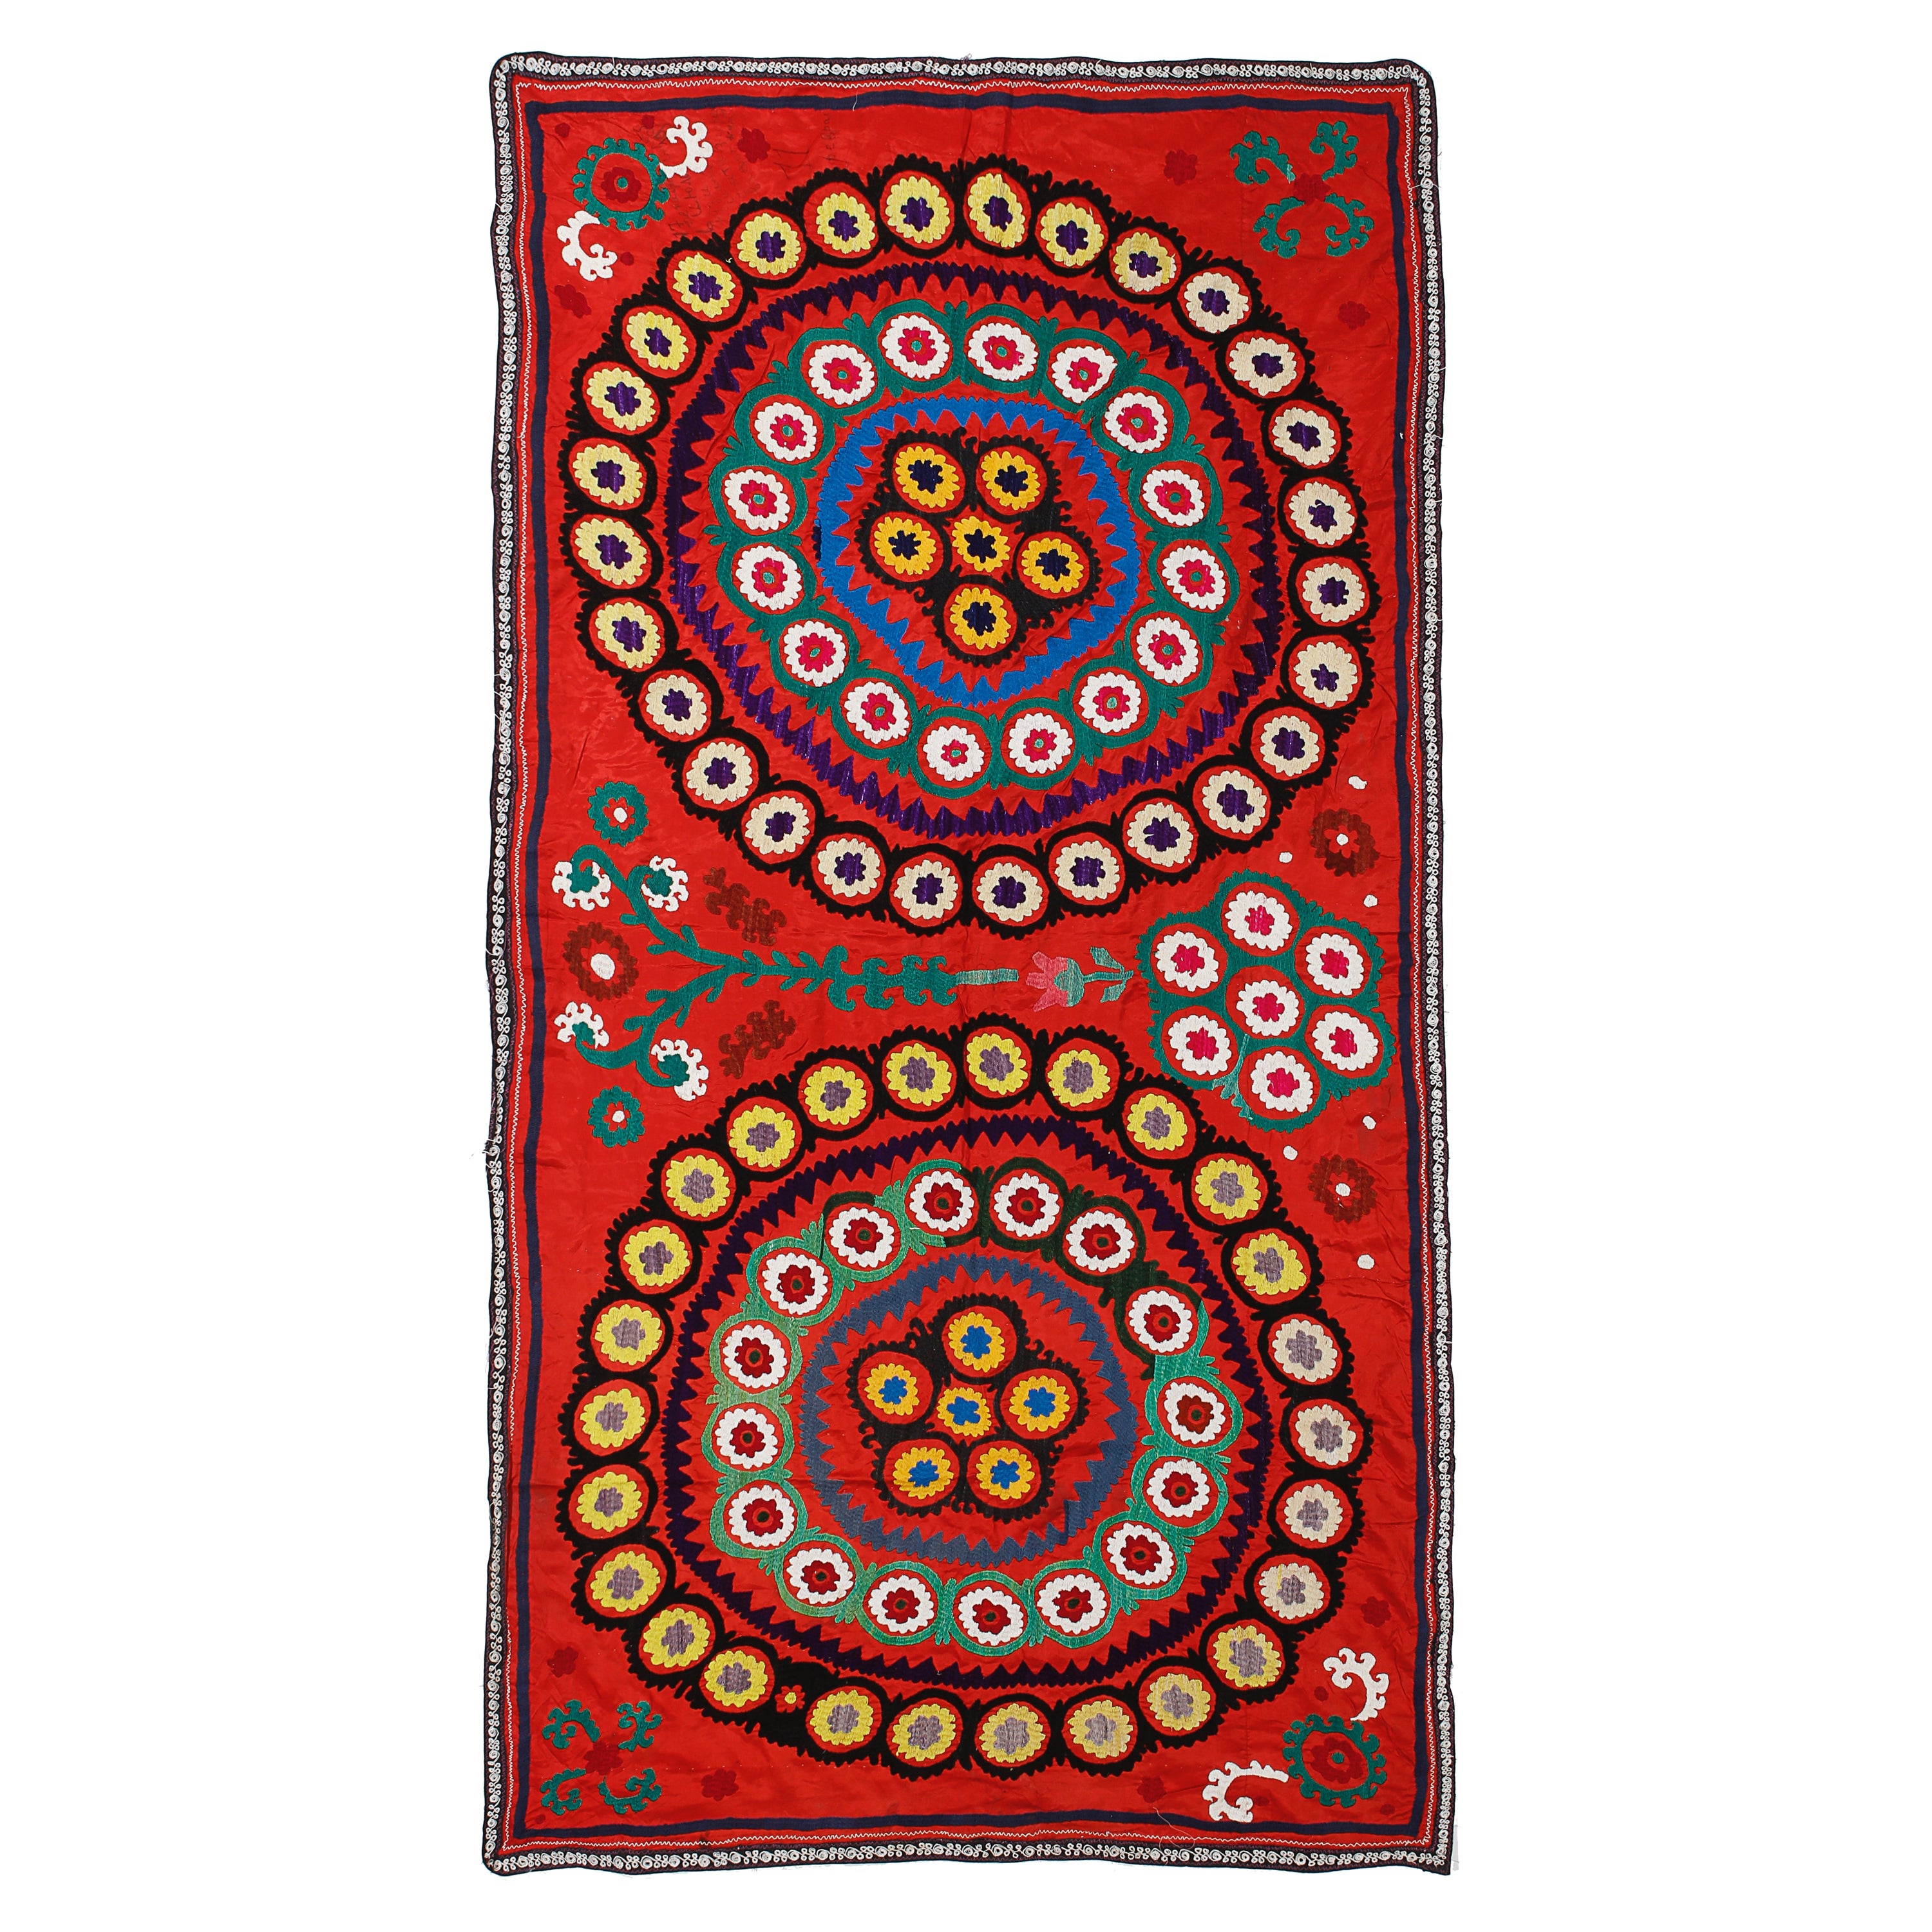 3.8x7.3 Ft Red Wall Decor, Silk Embroidered Wall Hanging, Needlework Table Cover (Décoration murale en soie) en vente